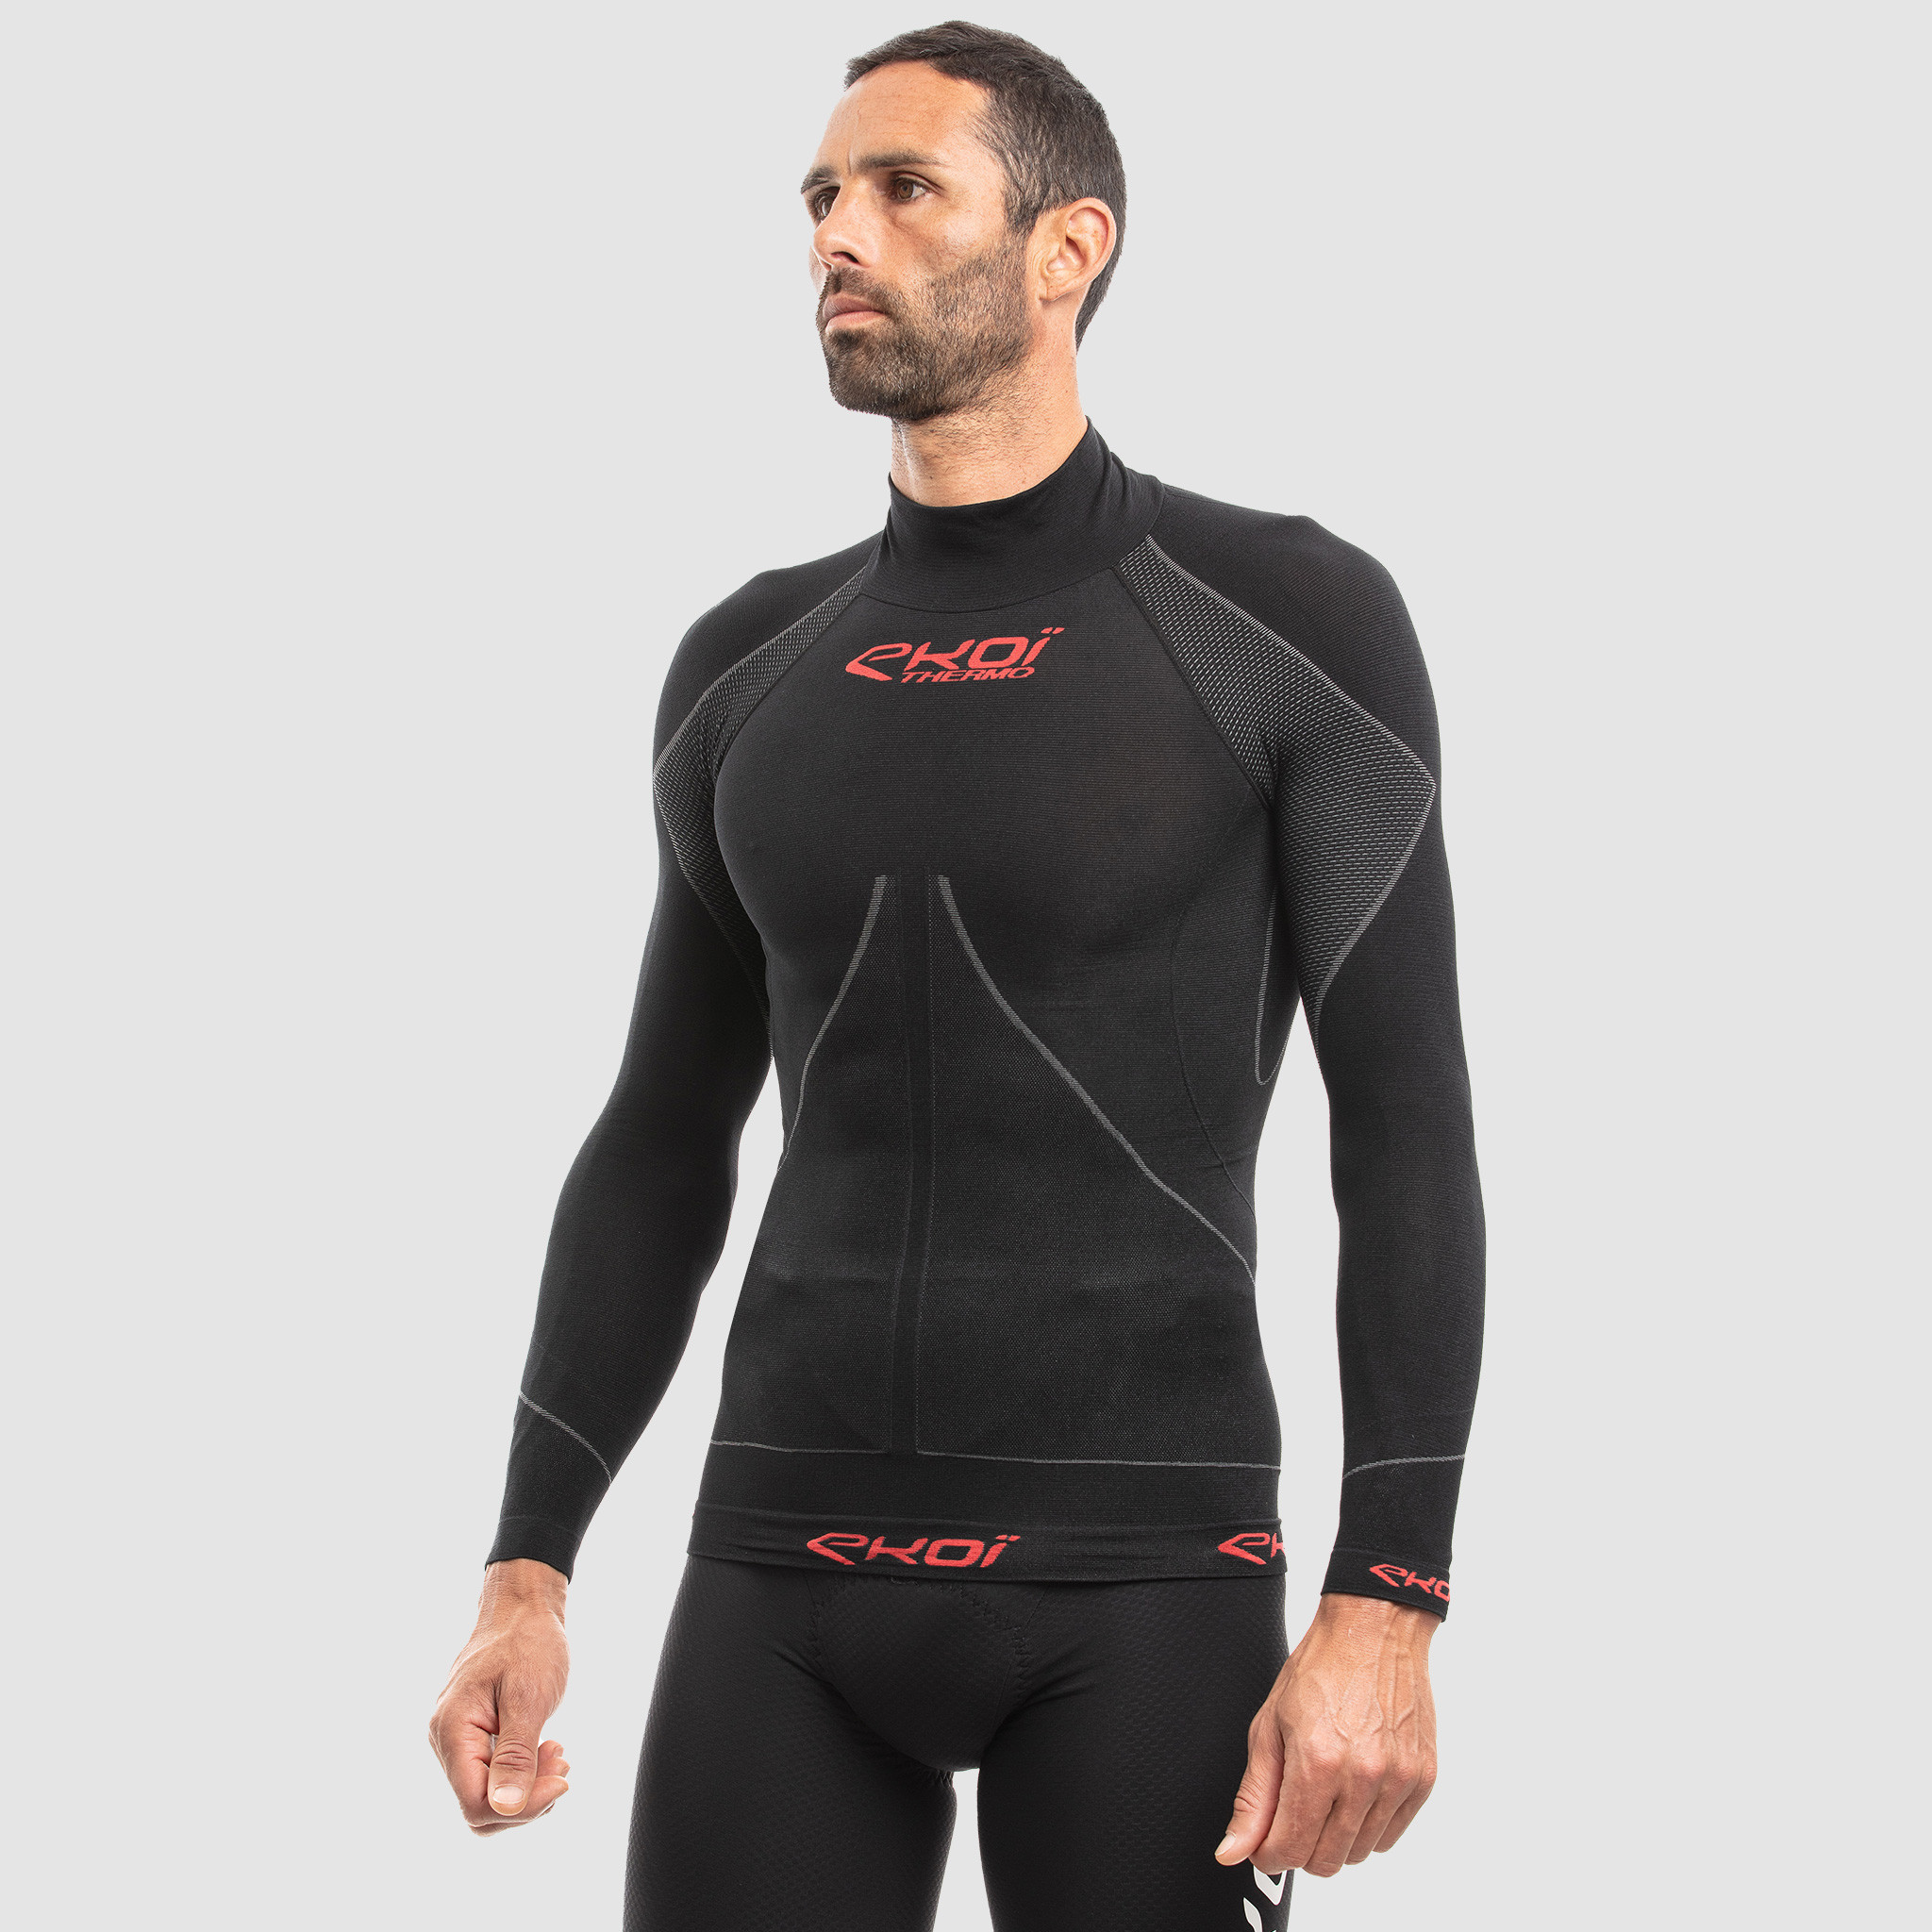 Damart Sport Maillot Thermolactyl 1/2 Zip Body 4 M homme pas cher